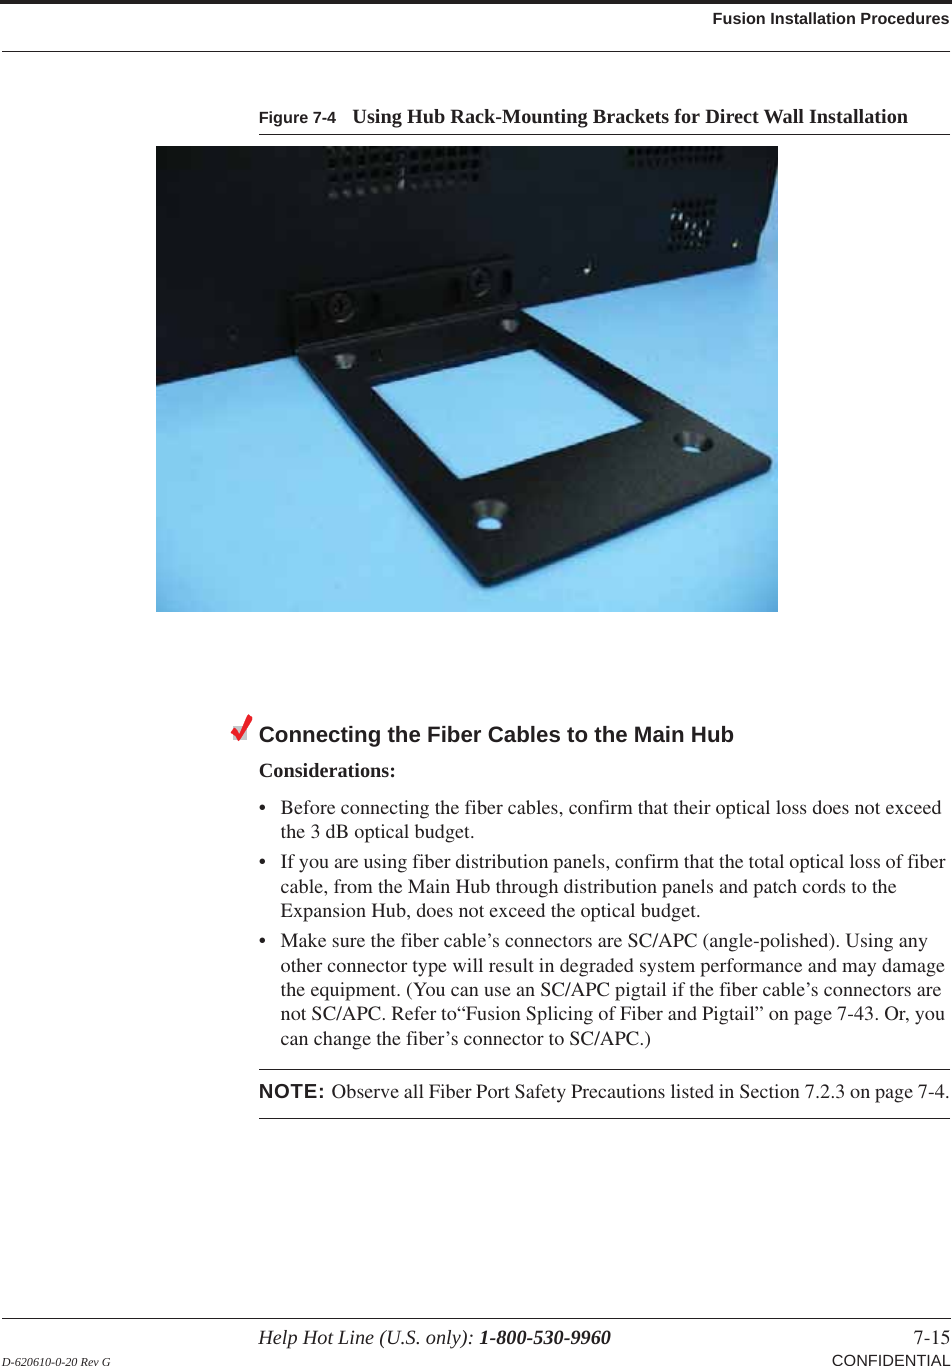 Help Hot Line (U.S. only): 1-800-530-9960 7-15 D-620610-0-20 Rev G CONFIDENTIALFusion Installation ProceduresFigure 7-4 Using Hub Rack-Mounting Brackets for Direct Wall InstallationConnecting the Fiber Cables to the Main HubConsiderations:• Before connecting the fiber cables, confirm that their optical loss does not exceed the 3  dB optical budget.• If you are using fiber distribution panels, confirm that the total optical loss of fiber cable, from the Main Hub through distribution panels and patch cords to the Expansion Hub, does not exceed the optical budget.• Make sure the fiber cable’s connectors are SC/APC (angle-polished). Using any other connector type will result in degraded system performance and may damage the equipment. (You can use an SC/APC pigtail if the fiber cable’s connectors are not SC/APC. Refer to“Fusion Splicing of Fiber and Pigtail” on page 7-43. Or, you can change the fiber’s connector to SC/APC.)NOTE: Observe all Fiber Port Safety Precautions listed in Section  7.2.3 on page 7-4.